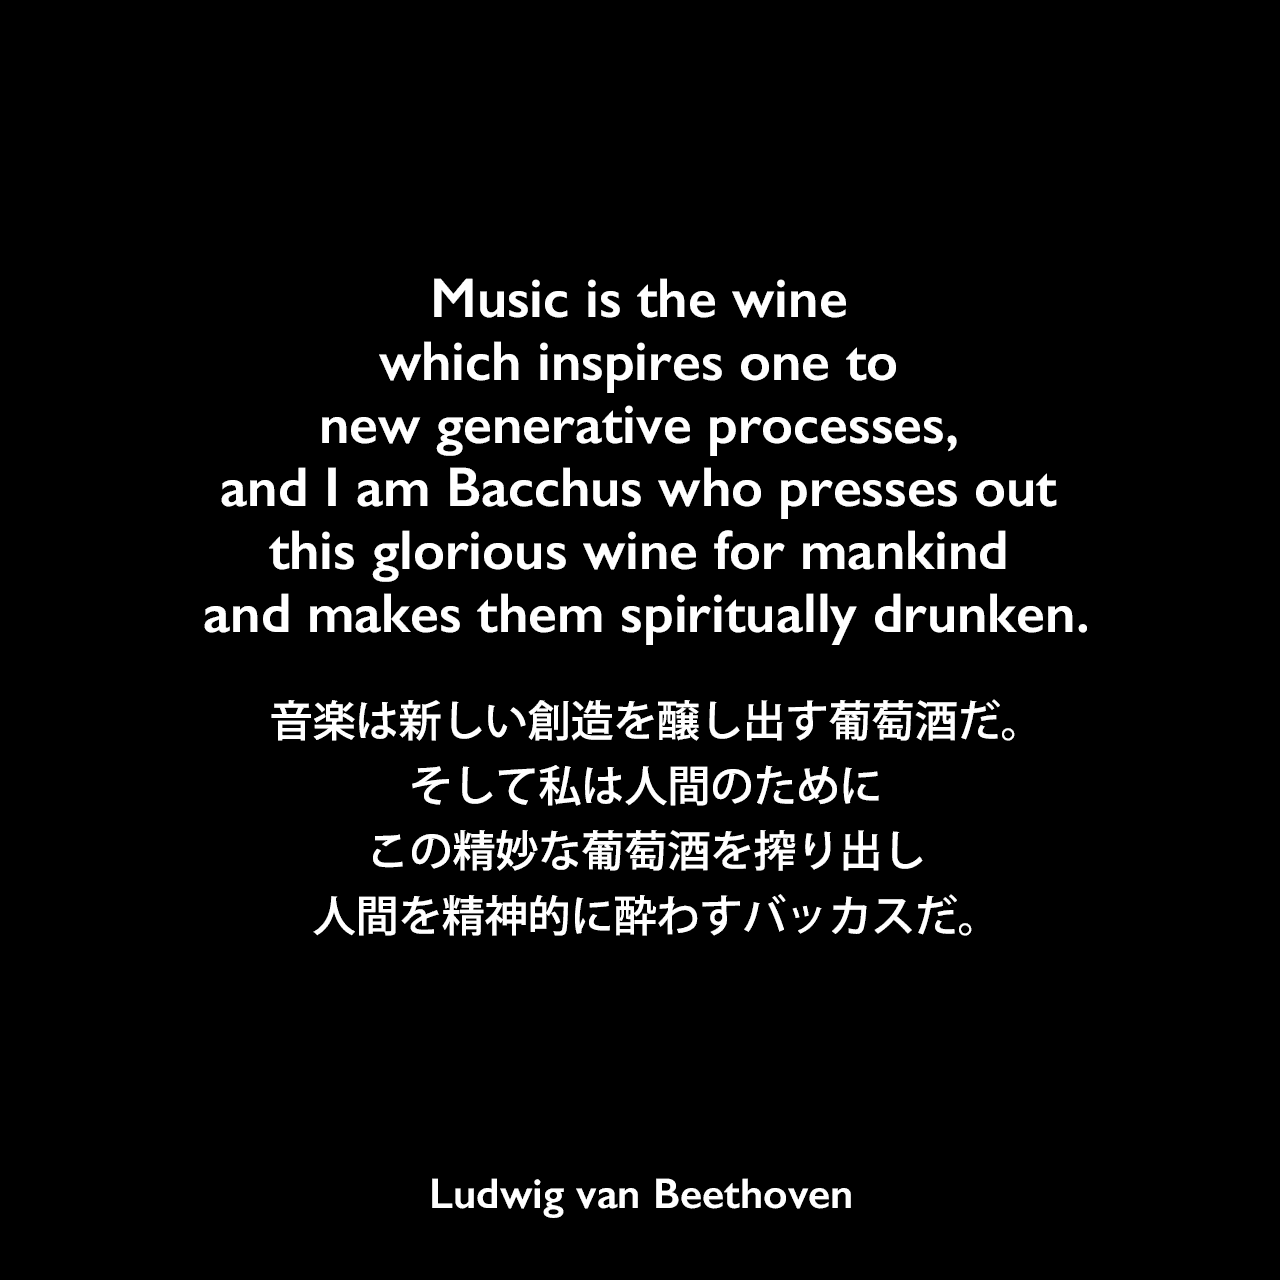 Music is the wine which inspires one to new generative processes, and I am Bacchus who presses out this glorious wine for mankind and makes them spiritually drunken.音楽は新しい創造を醸し出す葡萄酒だ。そして私は人間のためにこの精妙な葡萄酒を搾り出し、人間を精神的に酔わすバッカスだ。Ludwig van Beethoven